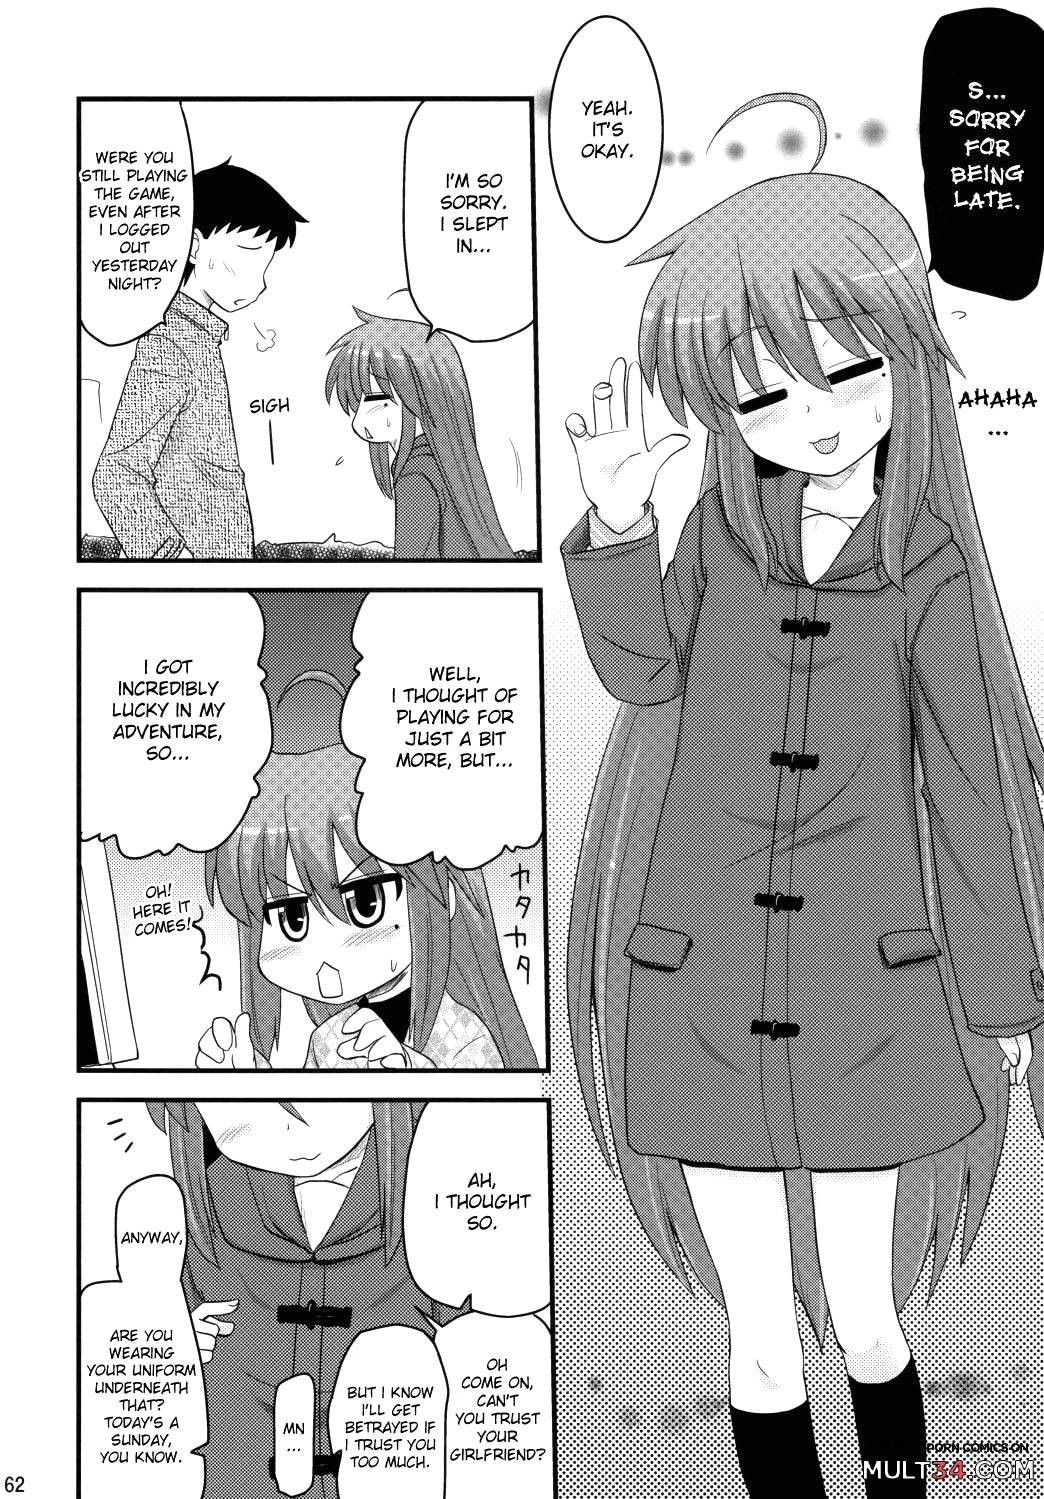 Konata and Oh-zu 4 people each and every one + 1 page 58